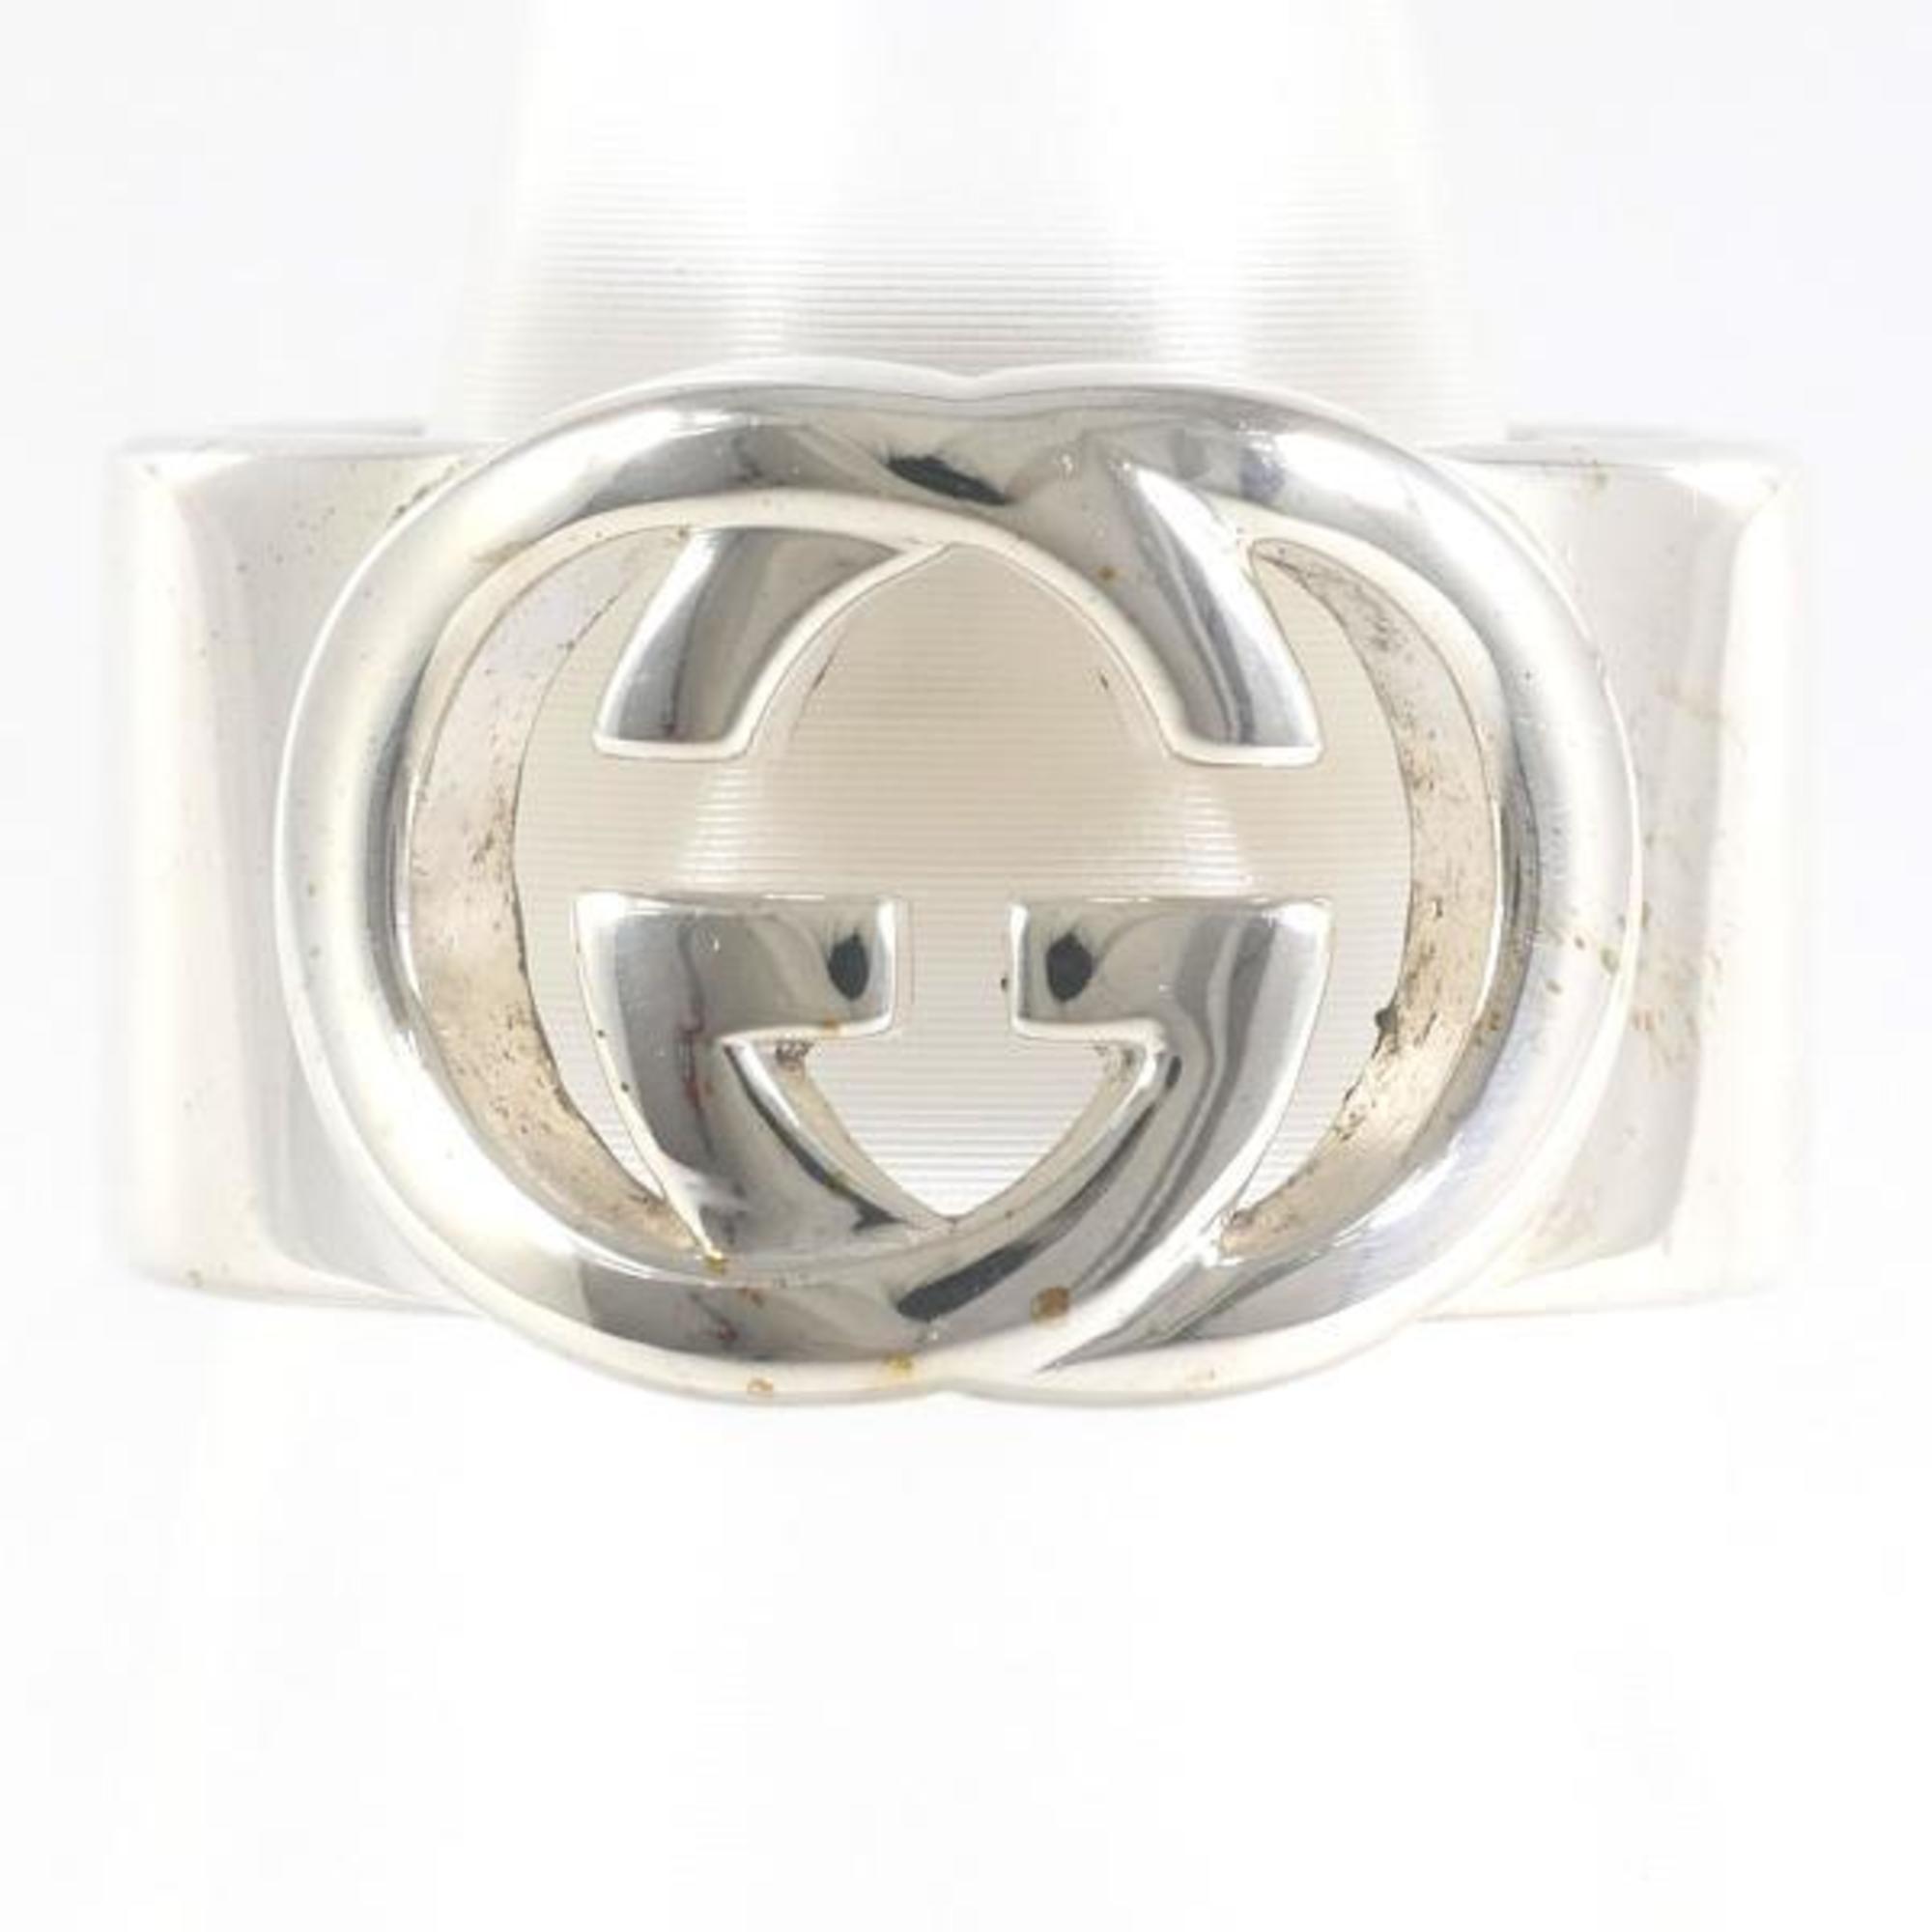 Gucci Interlocking G Silver Ring Size 12 Total Weight Approx. 9.6g Jewelry Wrapping Free